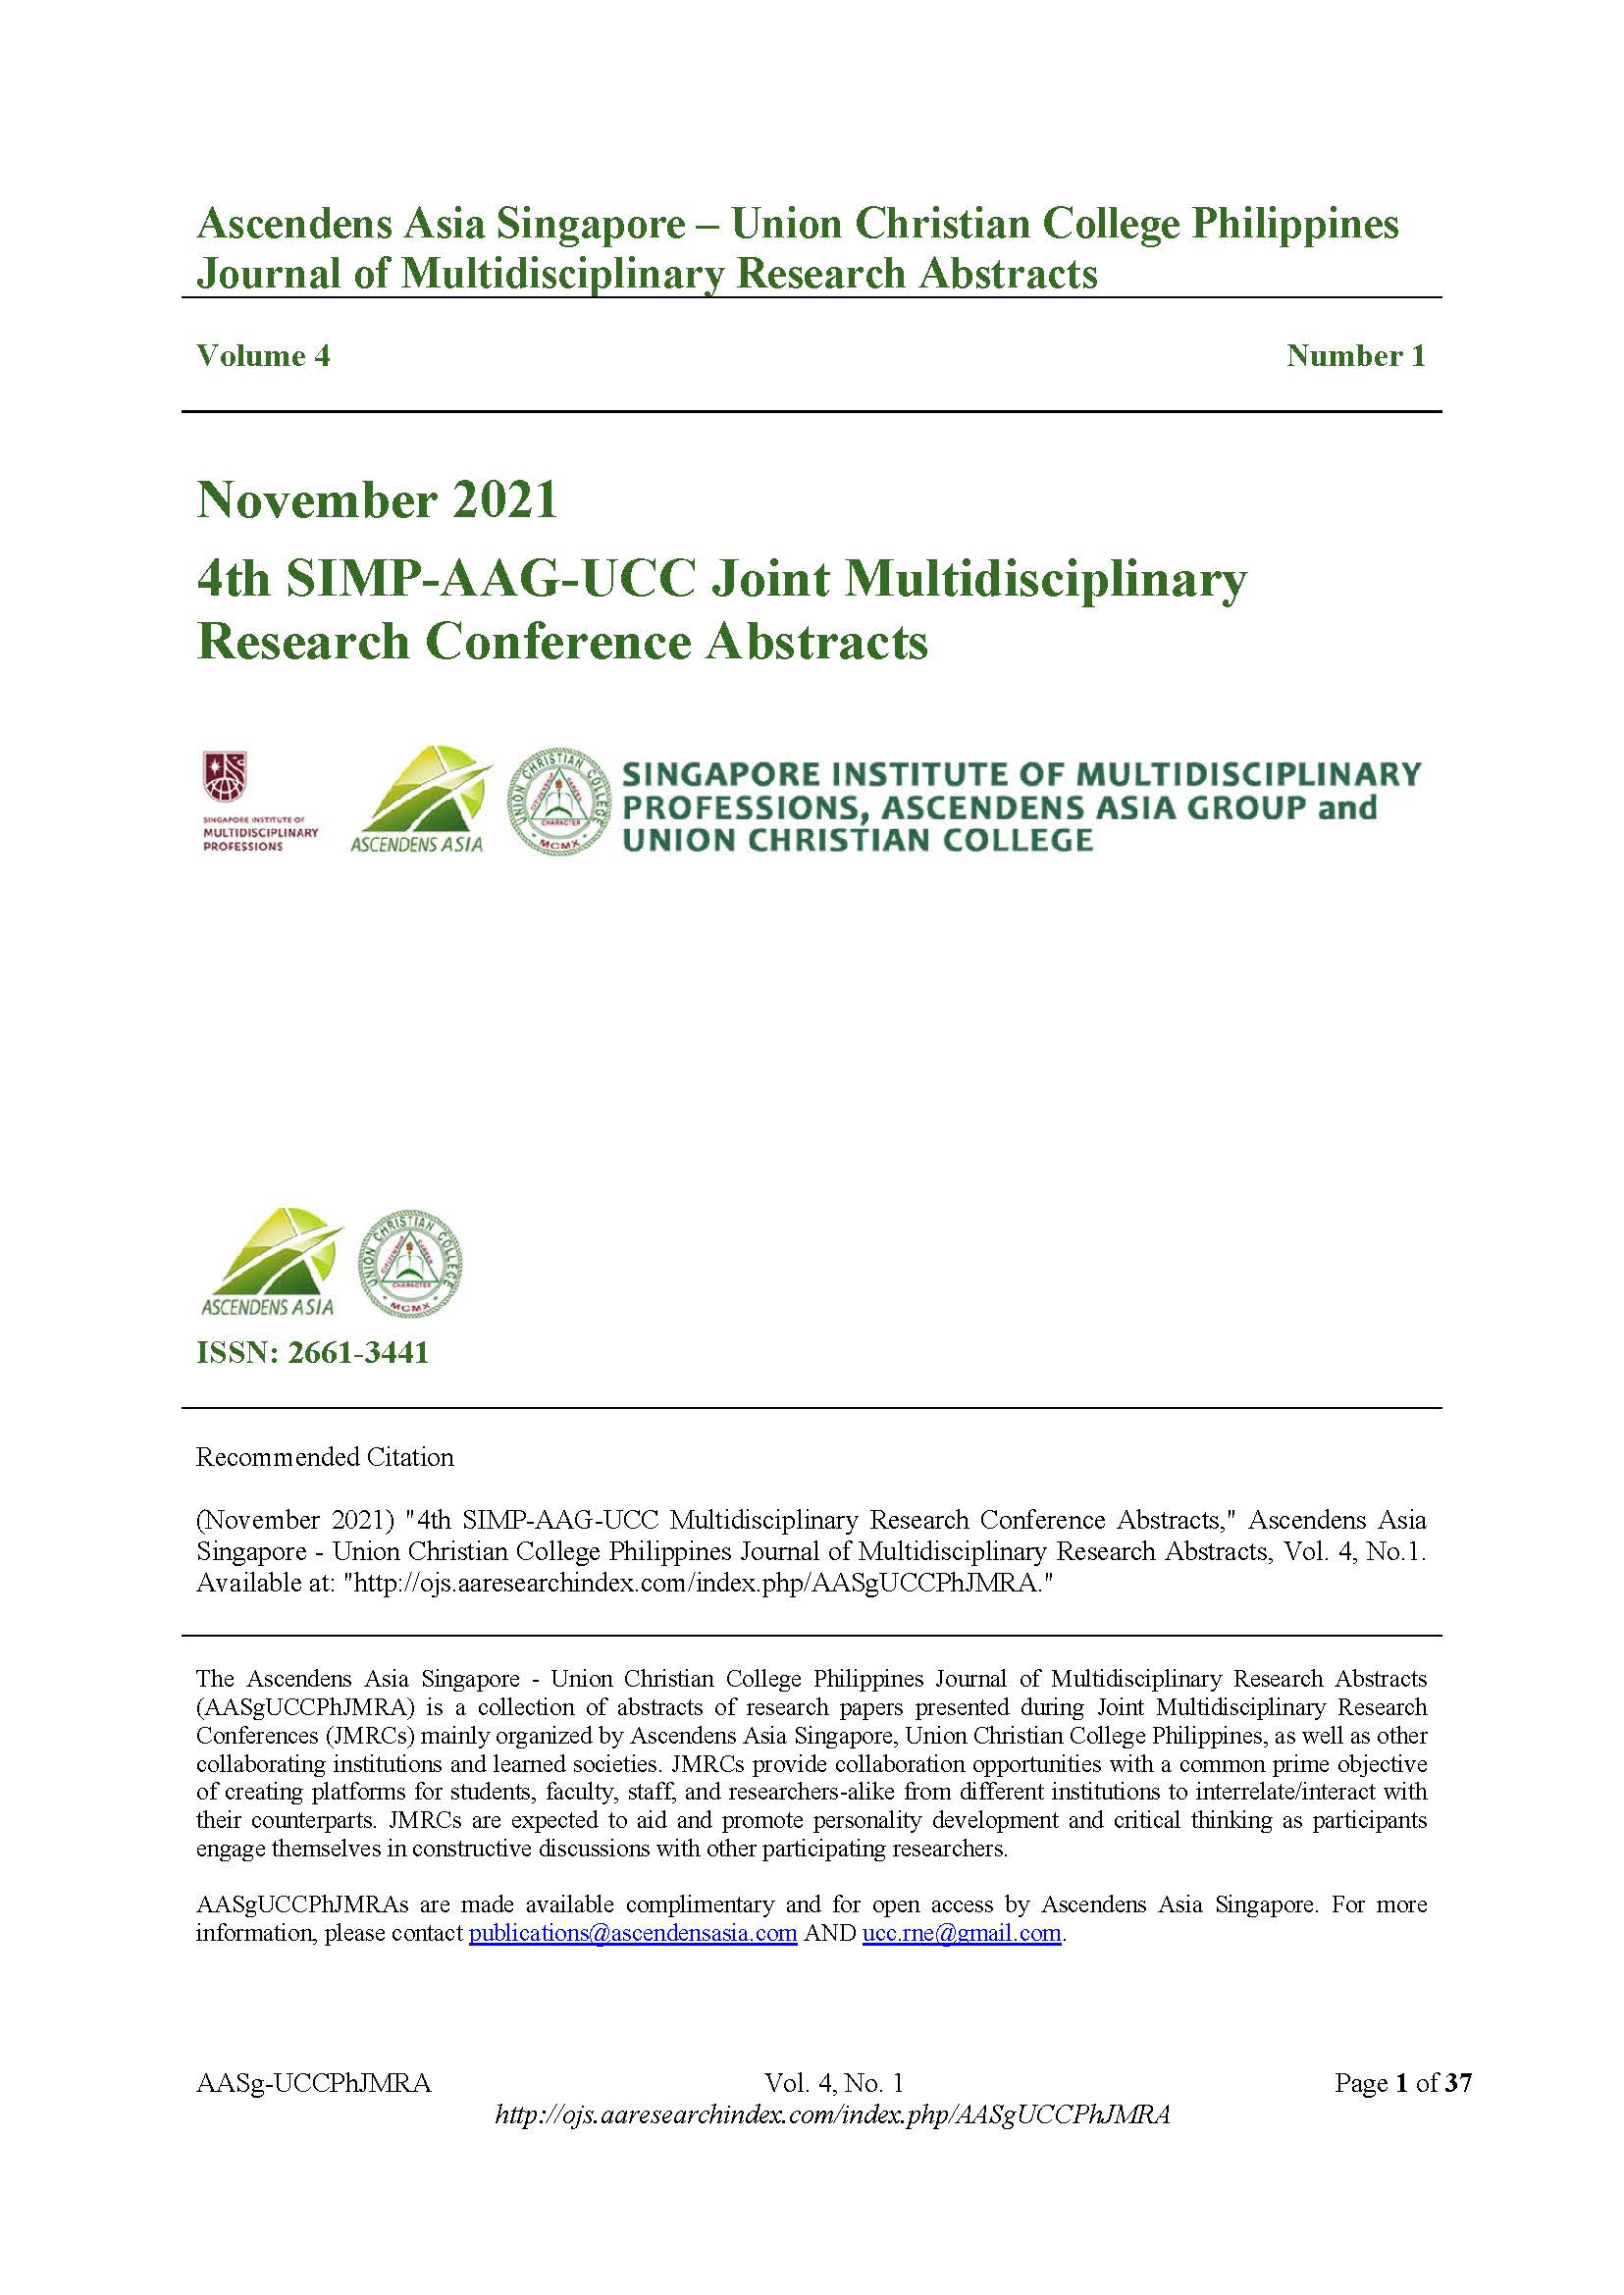 					View Vol. 4 No. 1 (2021): Ascendens Asia Singapore - Union Christian College Philippines Journal of Multidisciplinary Research Abstracts
				